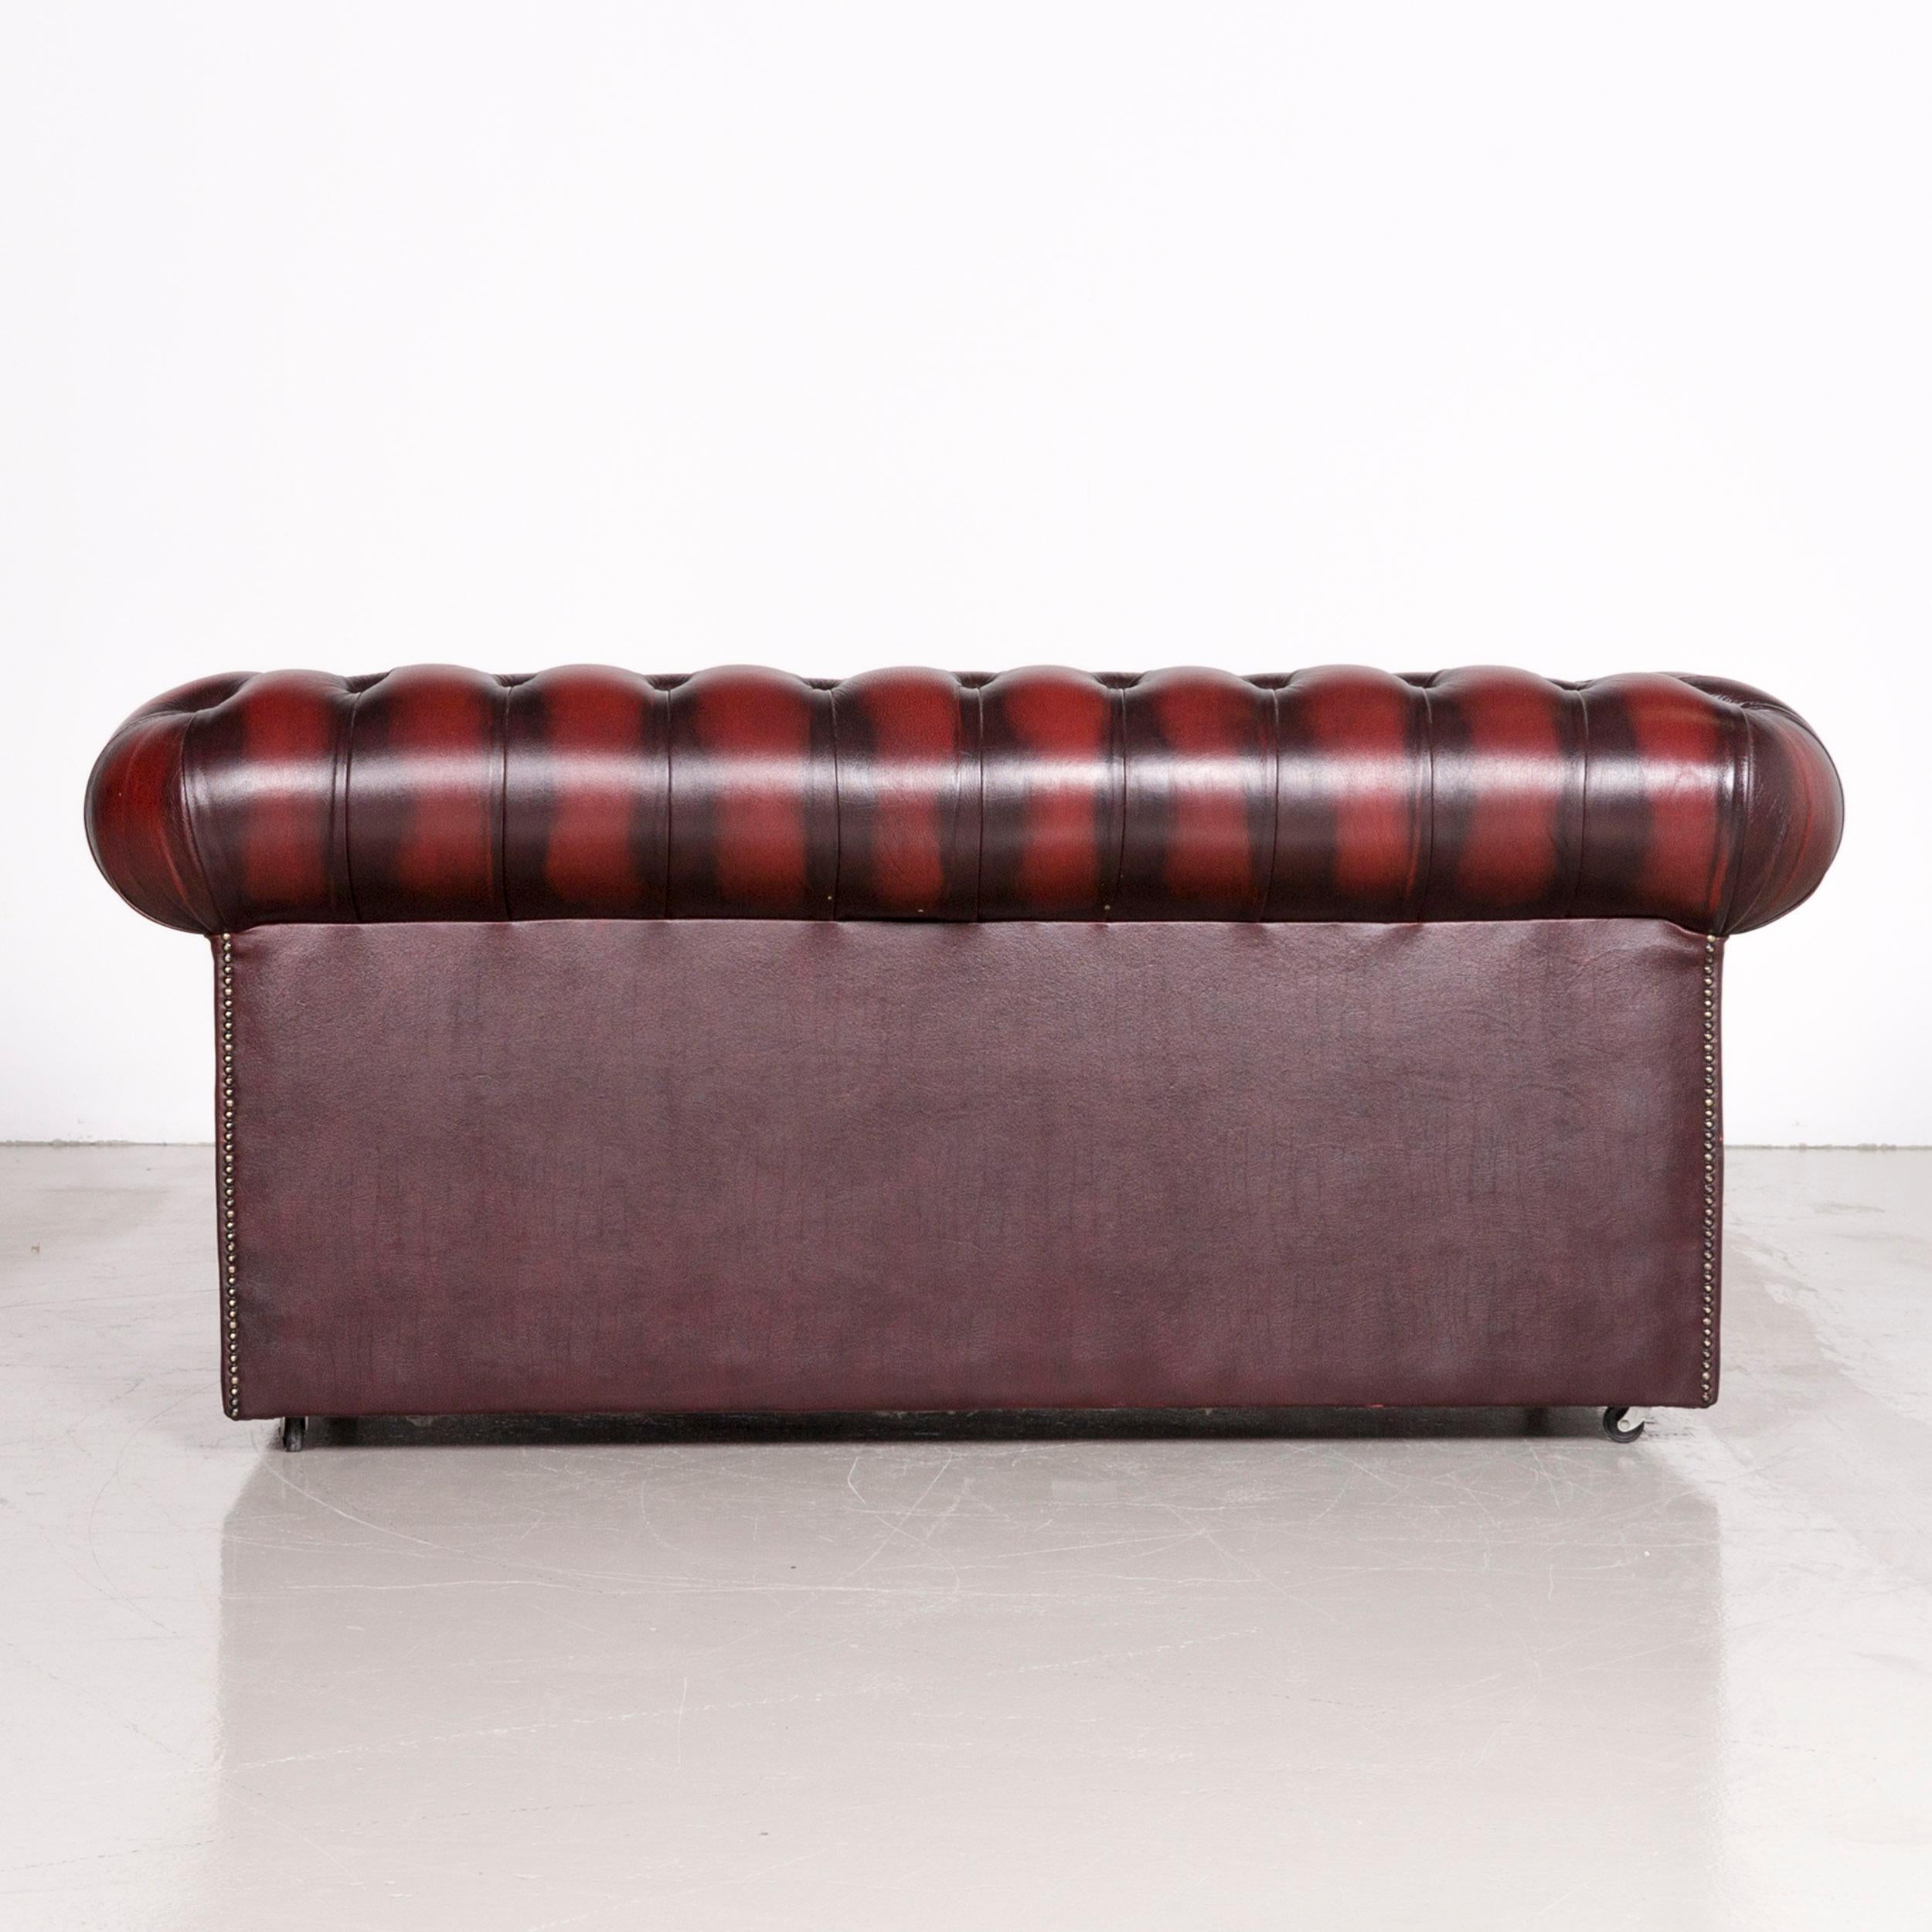 Chesterfield Leather Sofa Red Two-Seat Vintage Couch 2